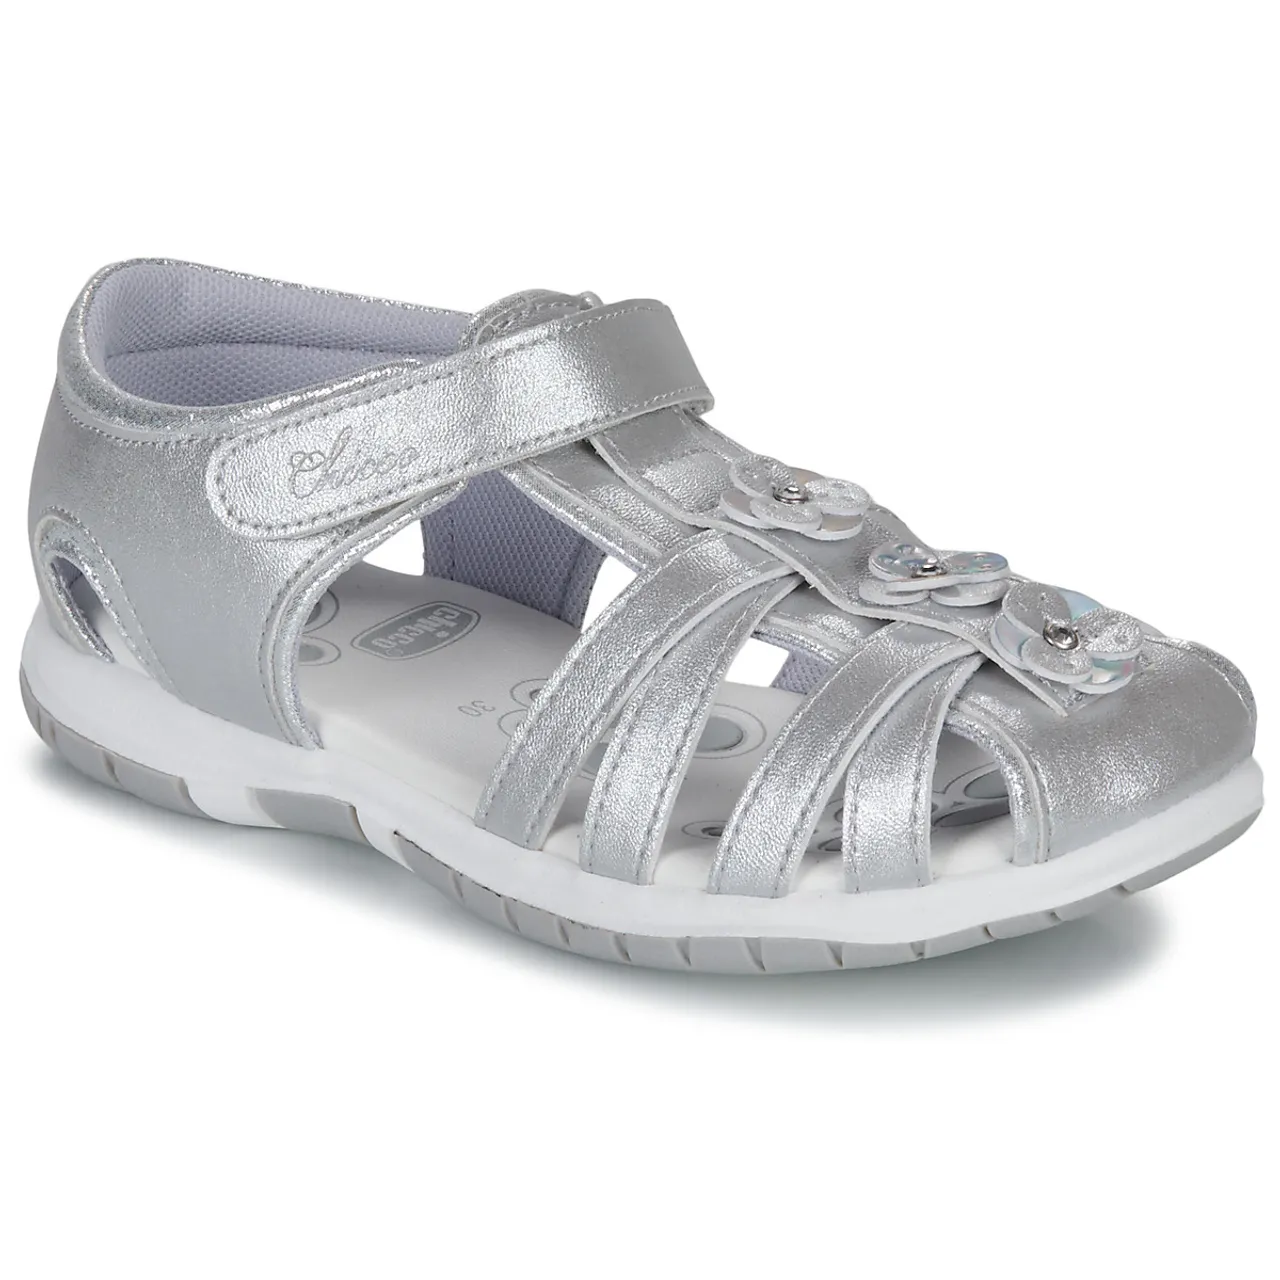 Chicco  FLAVIA  girls's Children's Sandals in Silver